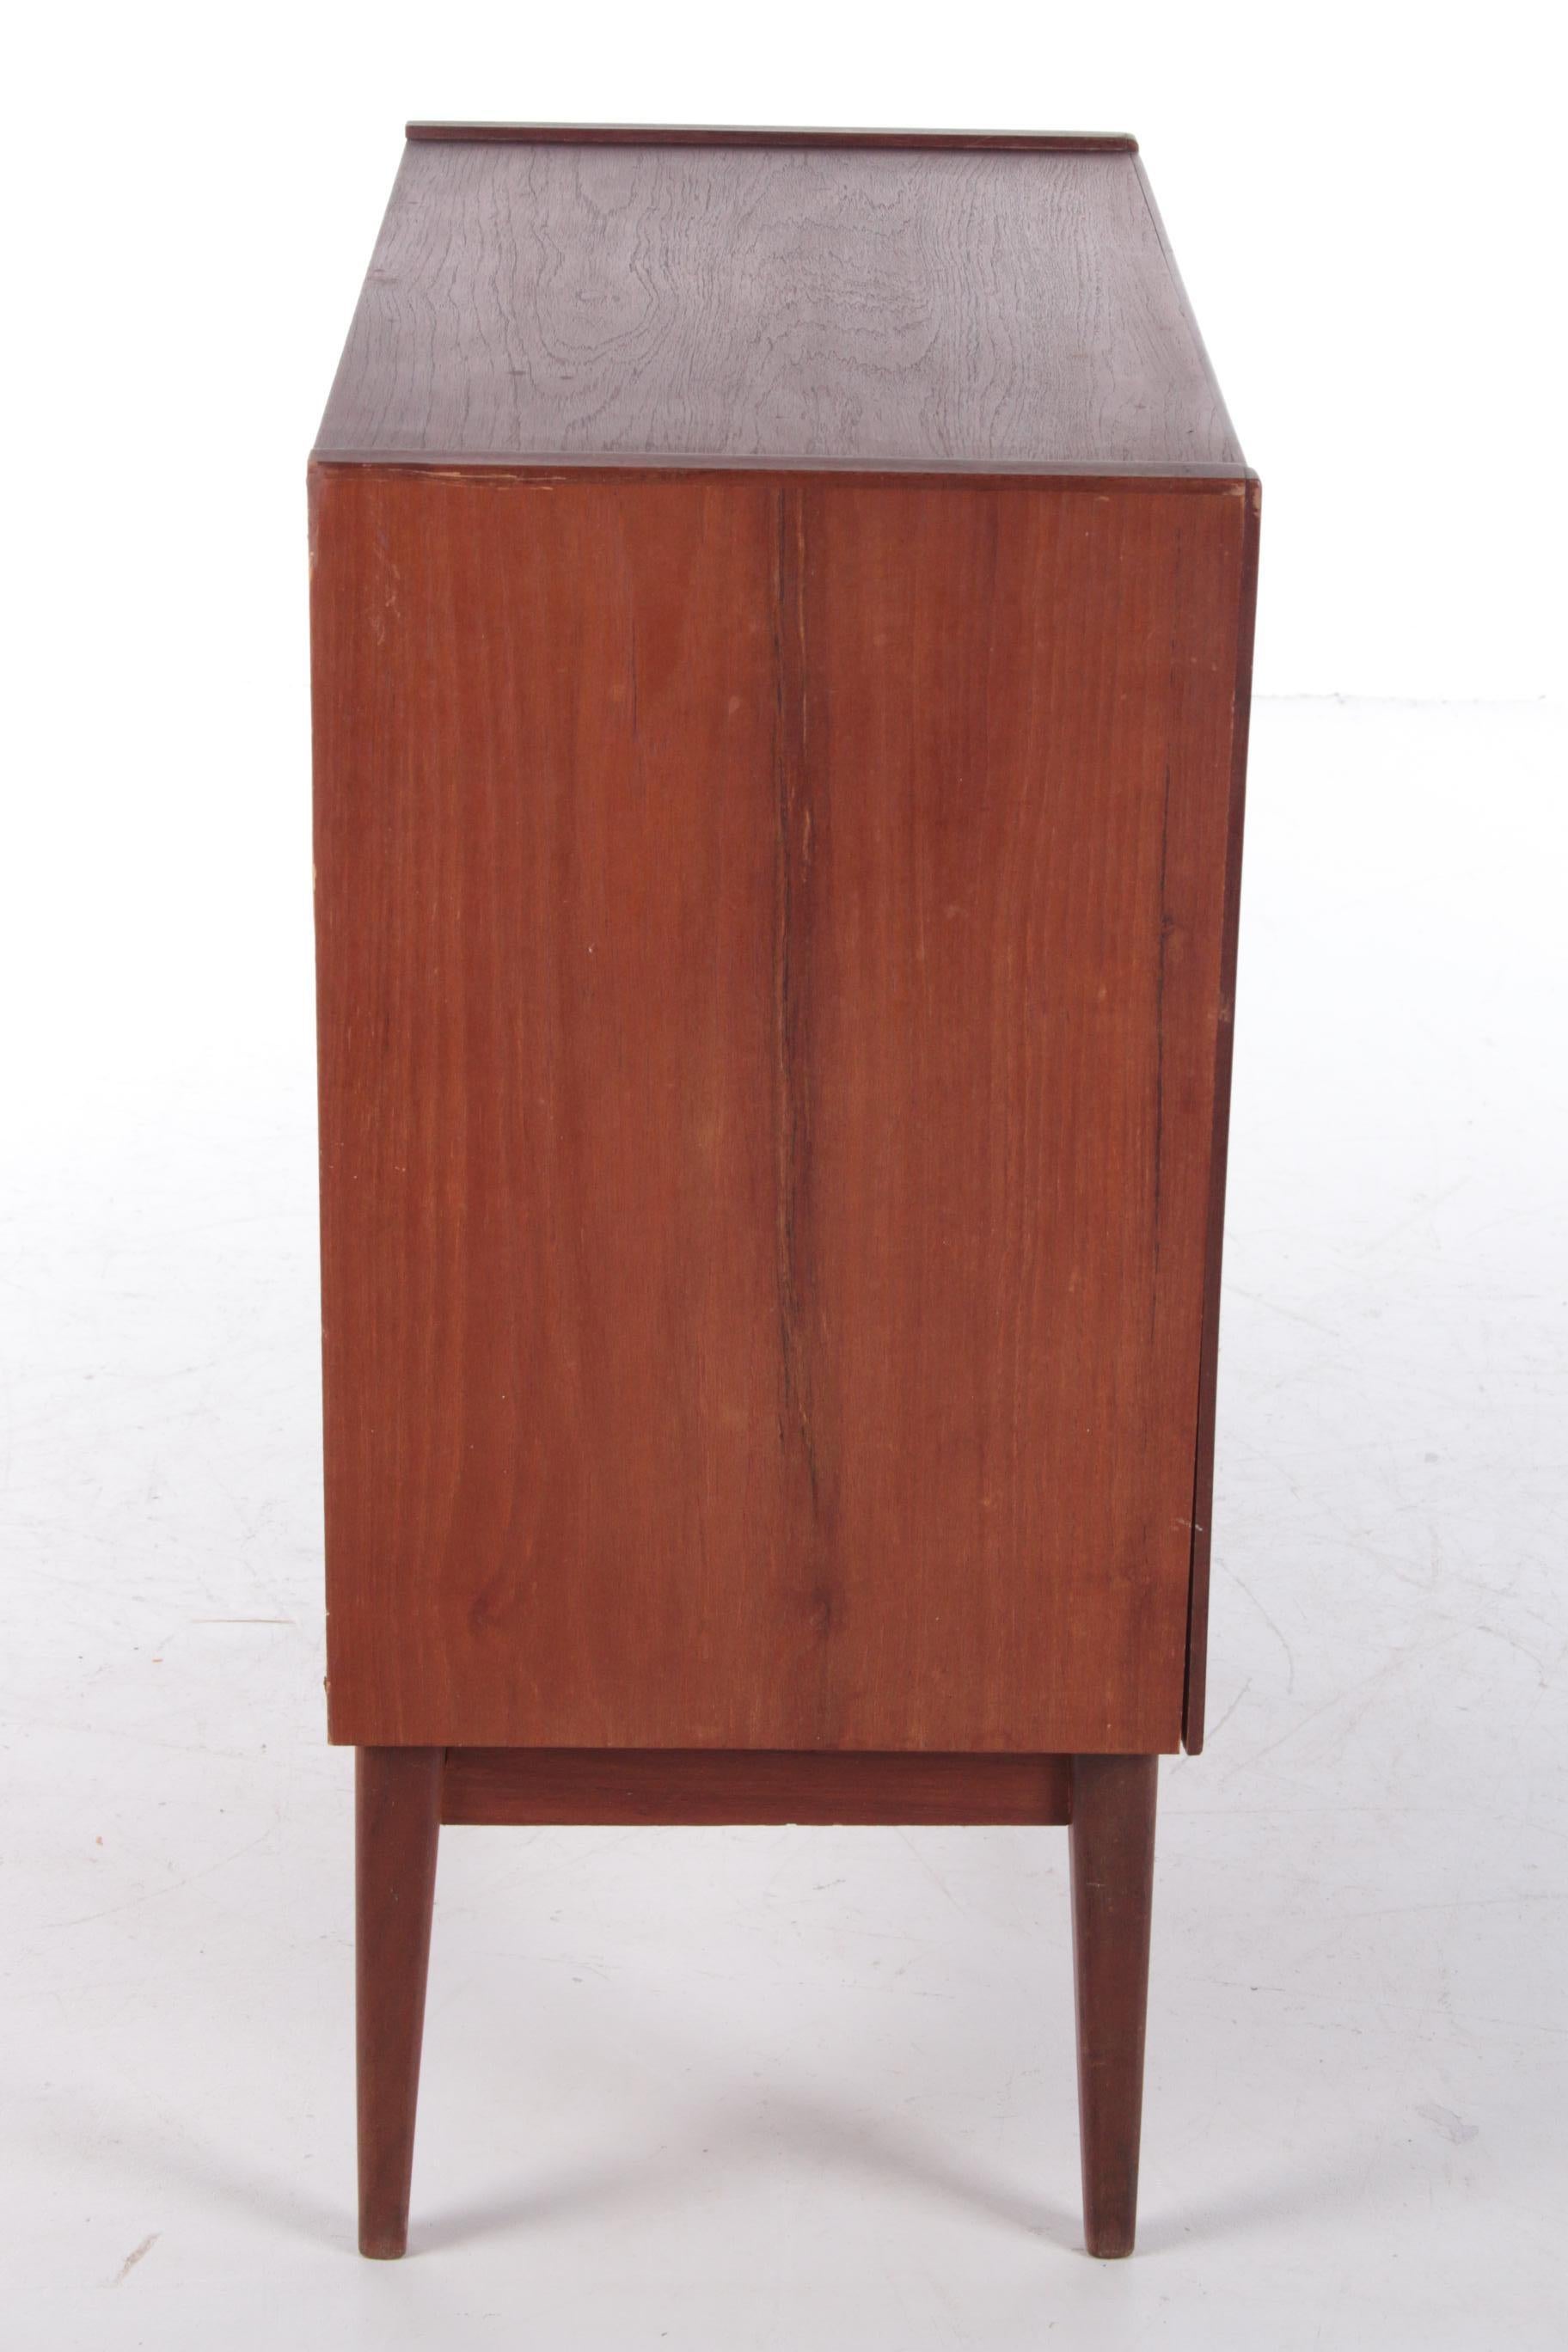 Mid-20th Century Danish Teak Designer Chest of Drawers with Four Drawers, 1960s